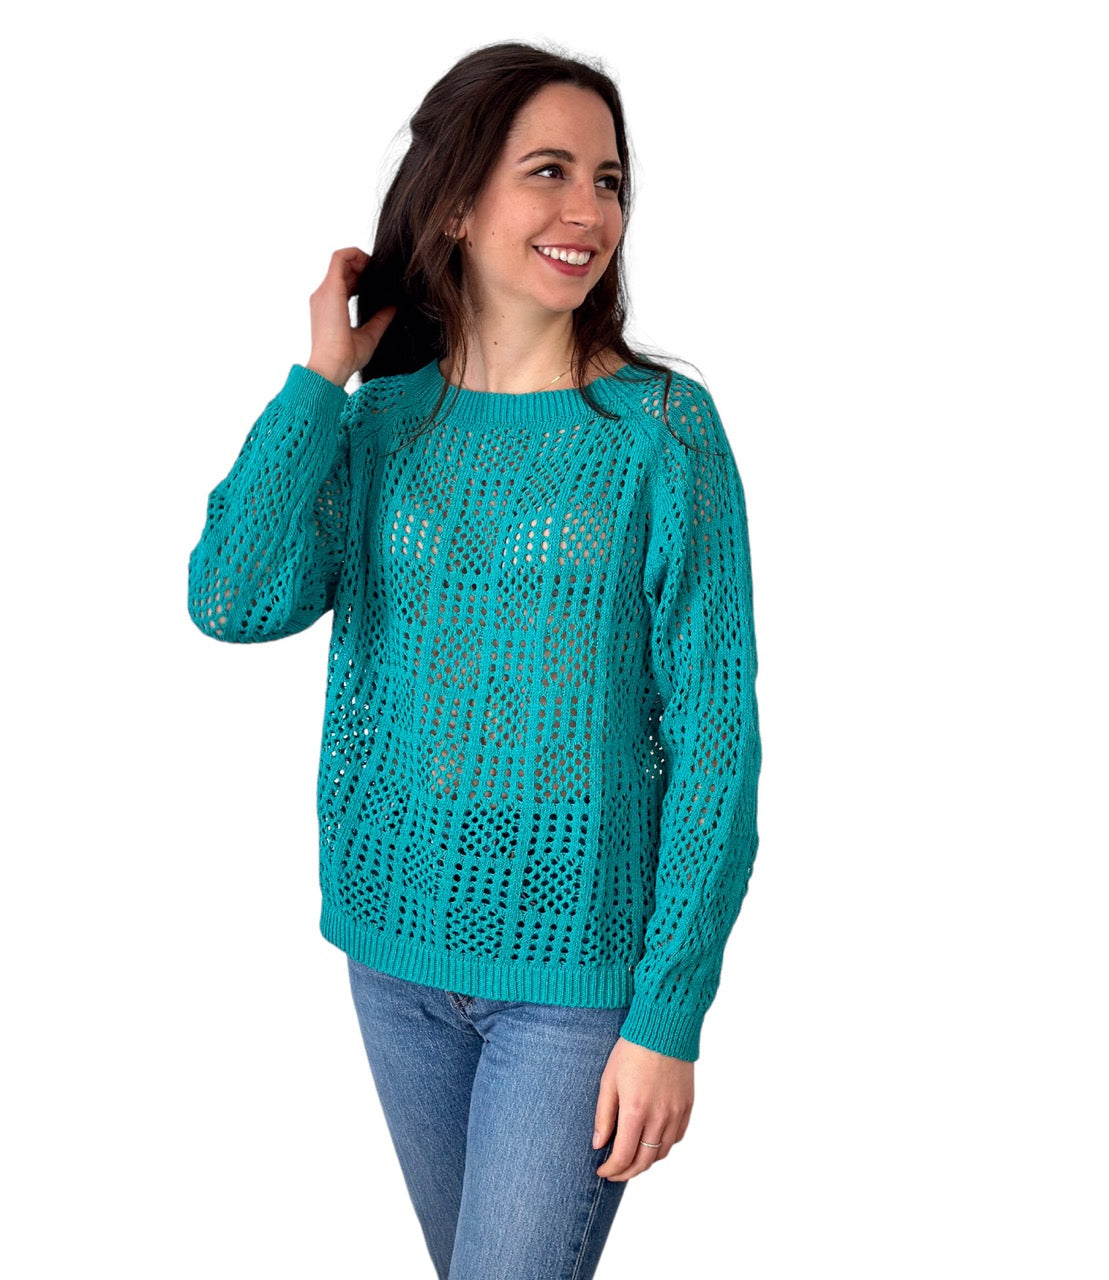 Please emerald perforated knit pullover